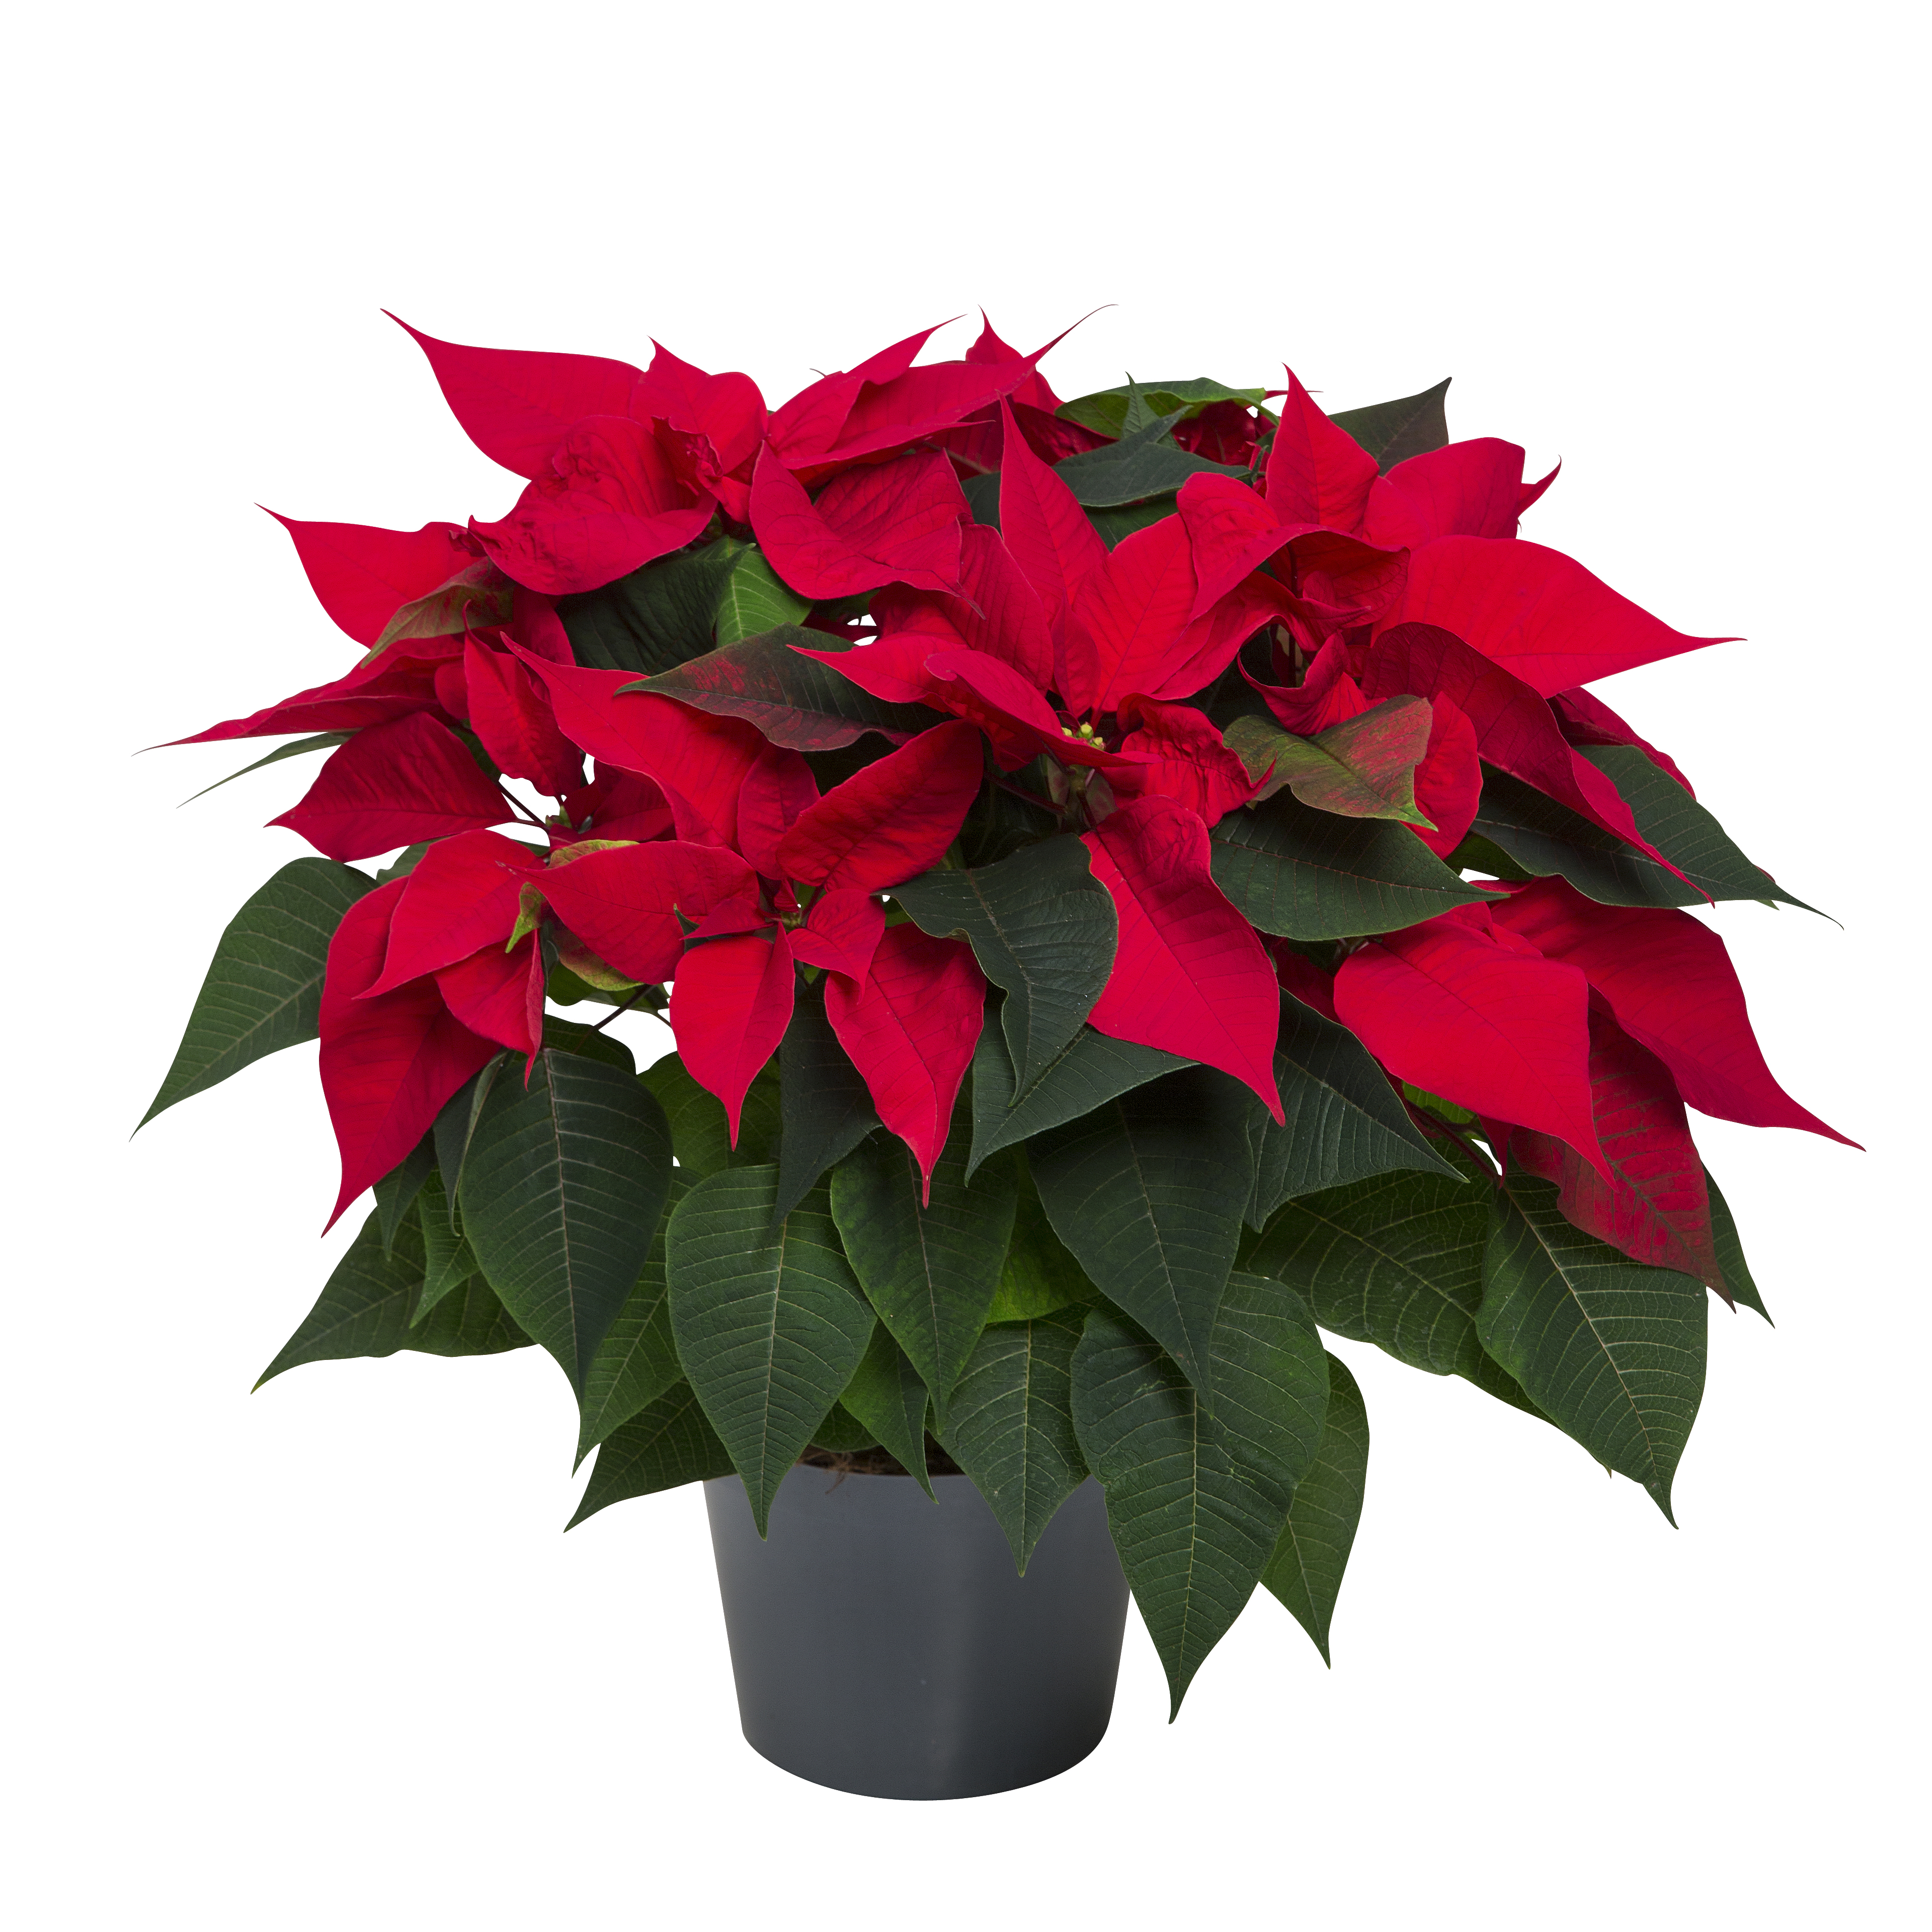 The Best Way to Water Your Poinsettia